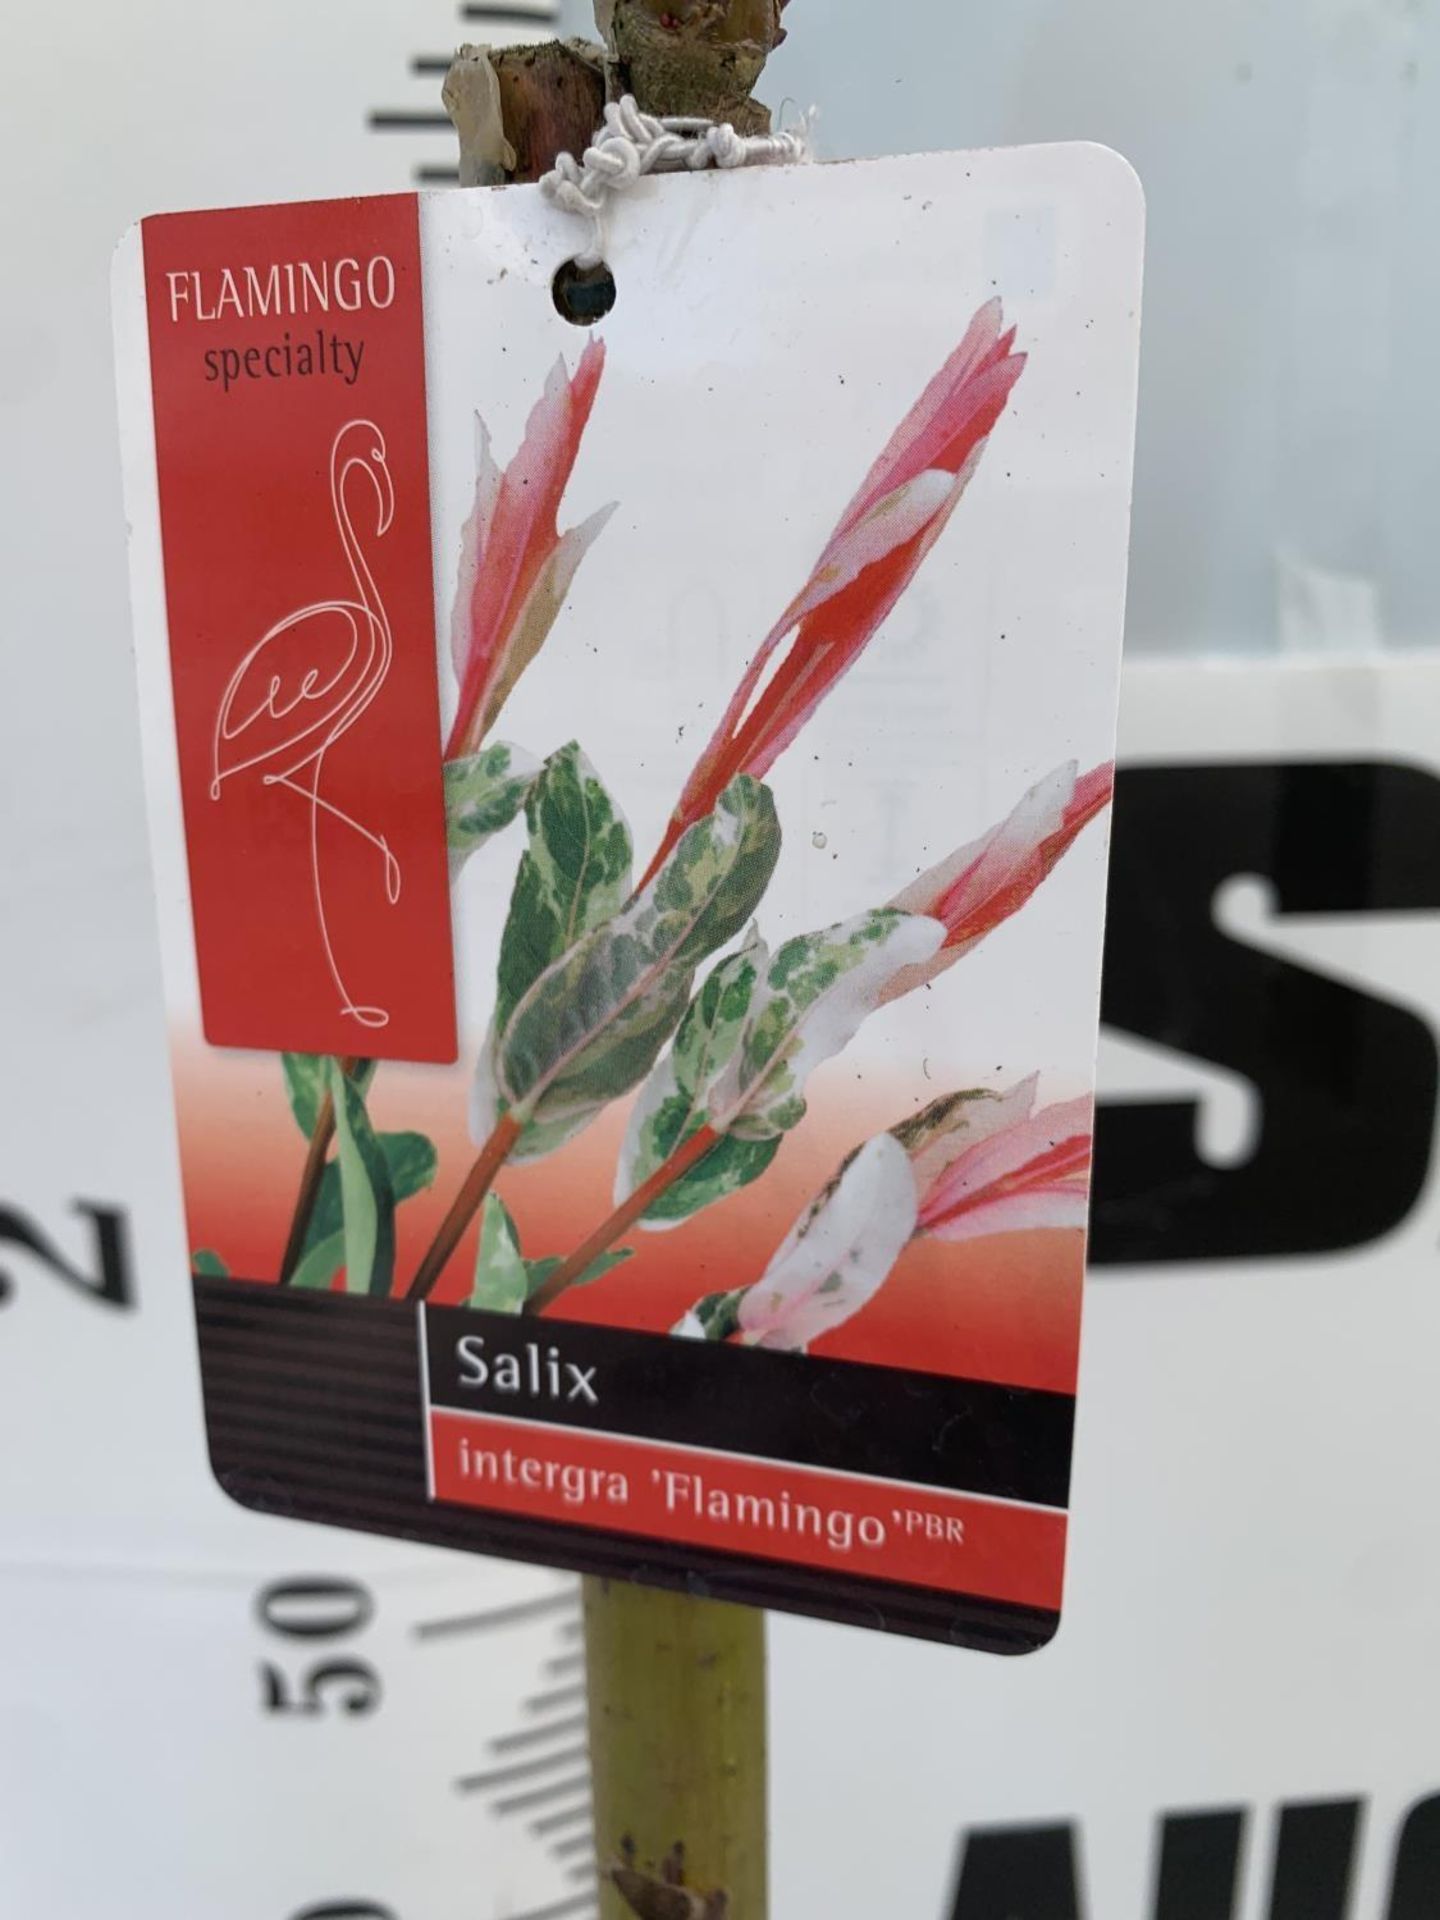 TWO STANDARD SALIX INTEGRA 'FLAMINGO' OVER 110CM IN HEIGHT IN 3 LTR POTS PLUS VAT TO BE SOLD FOR THE - Image 8 of 8